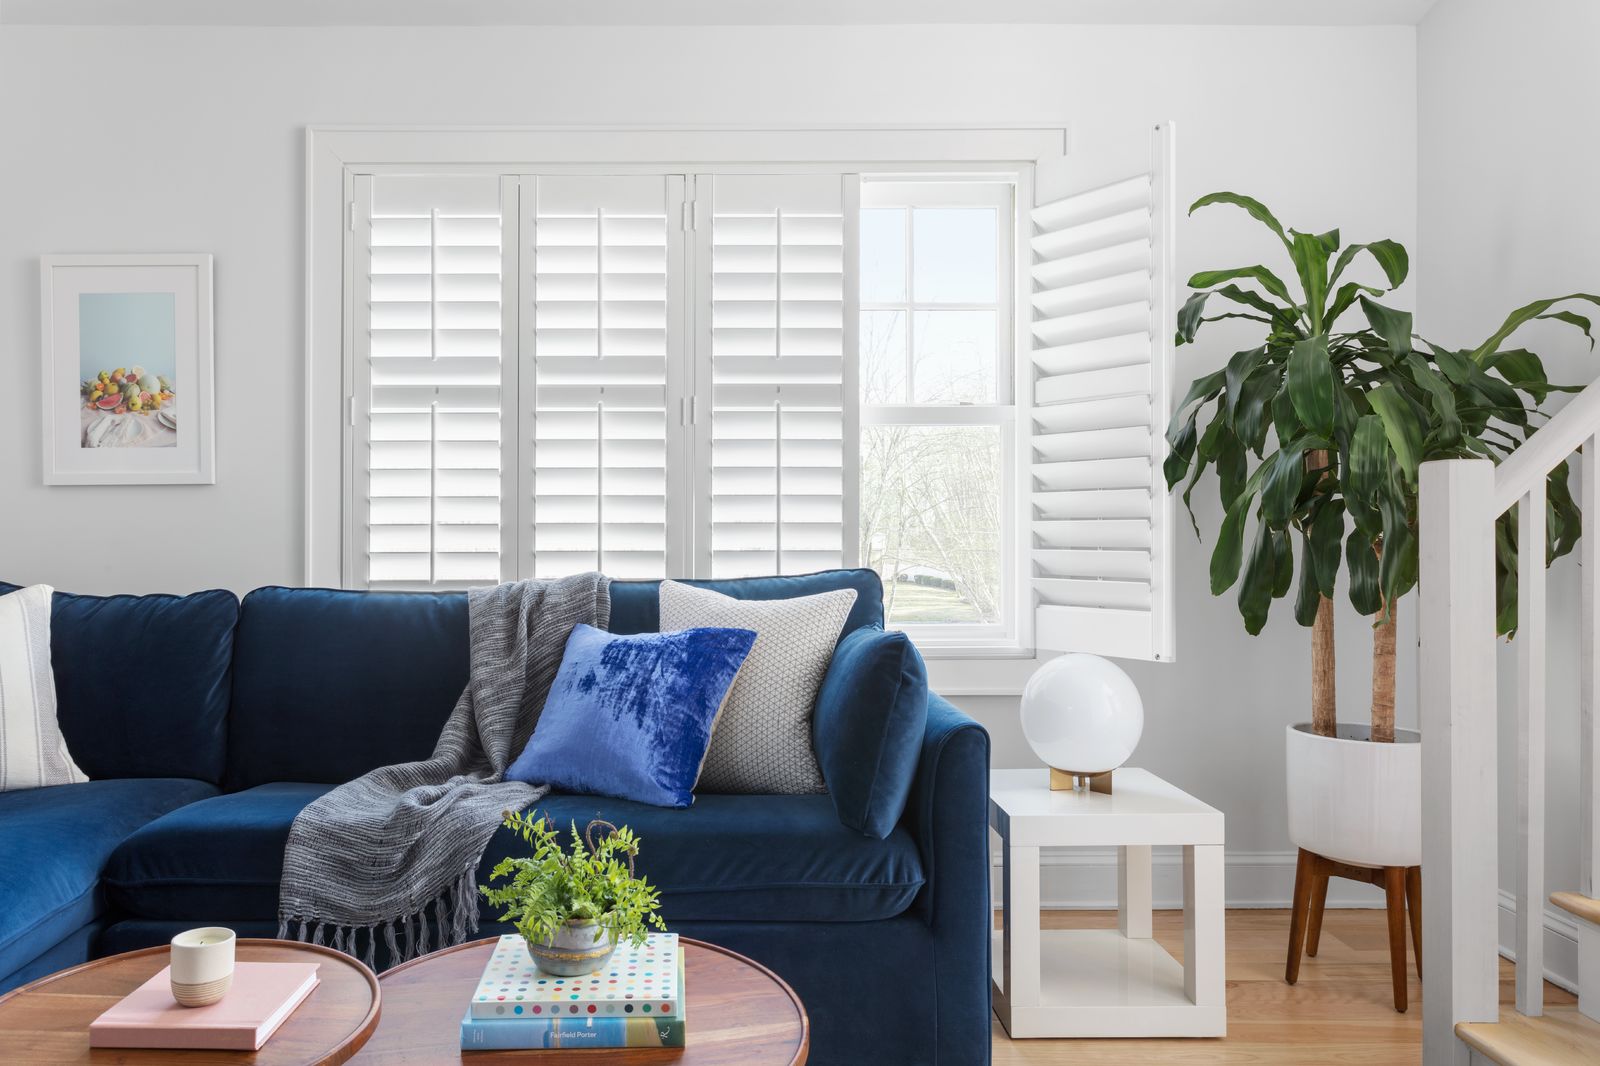 White indoor shutters cover four windows in a modern living room.